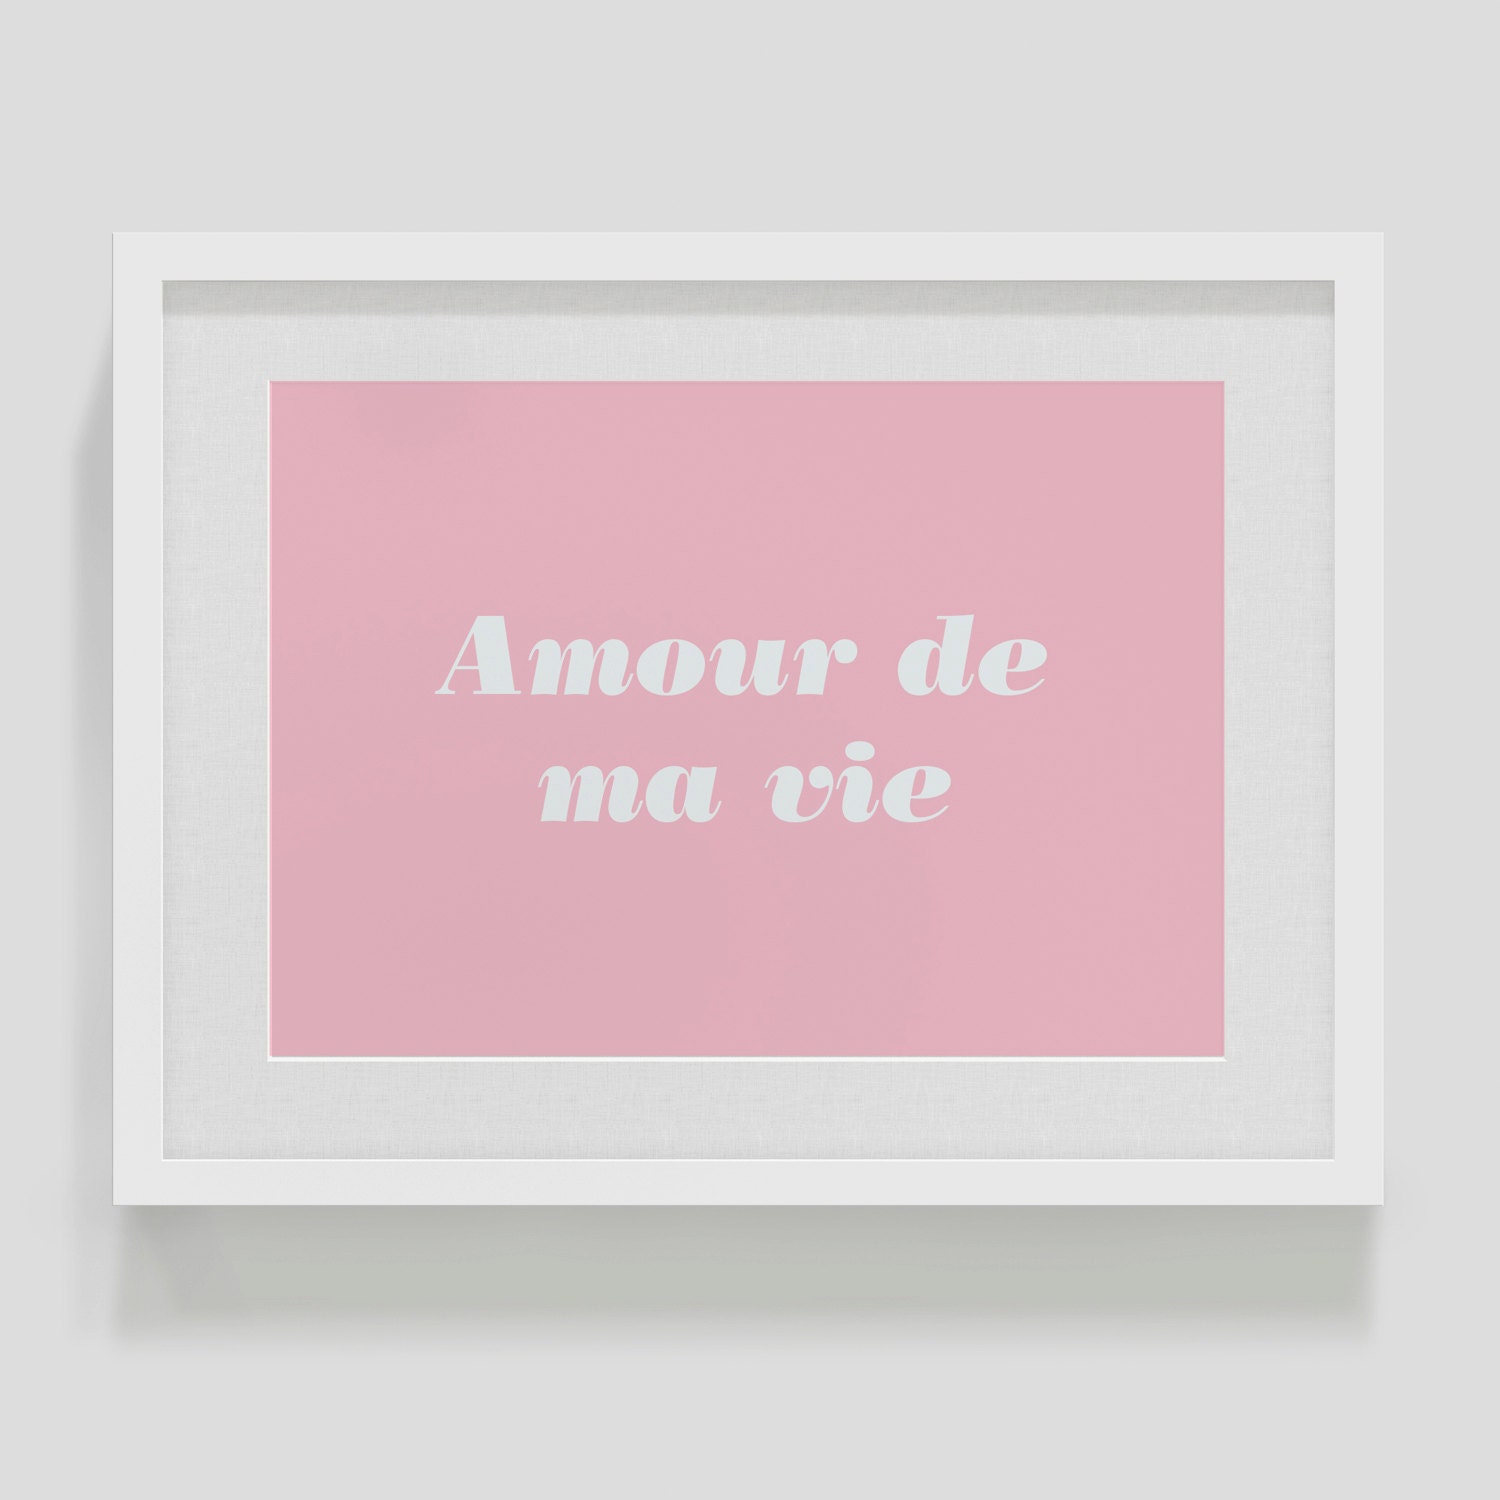 Images of Quotes About Love And Life In French